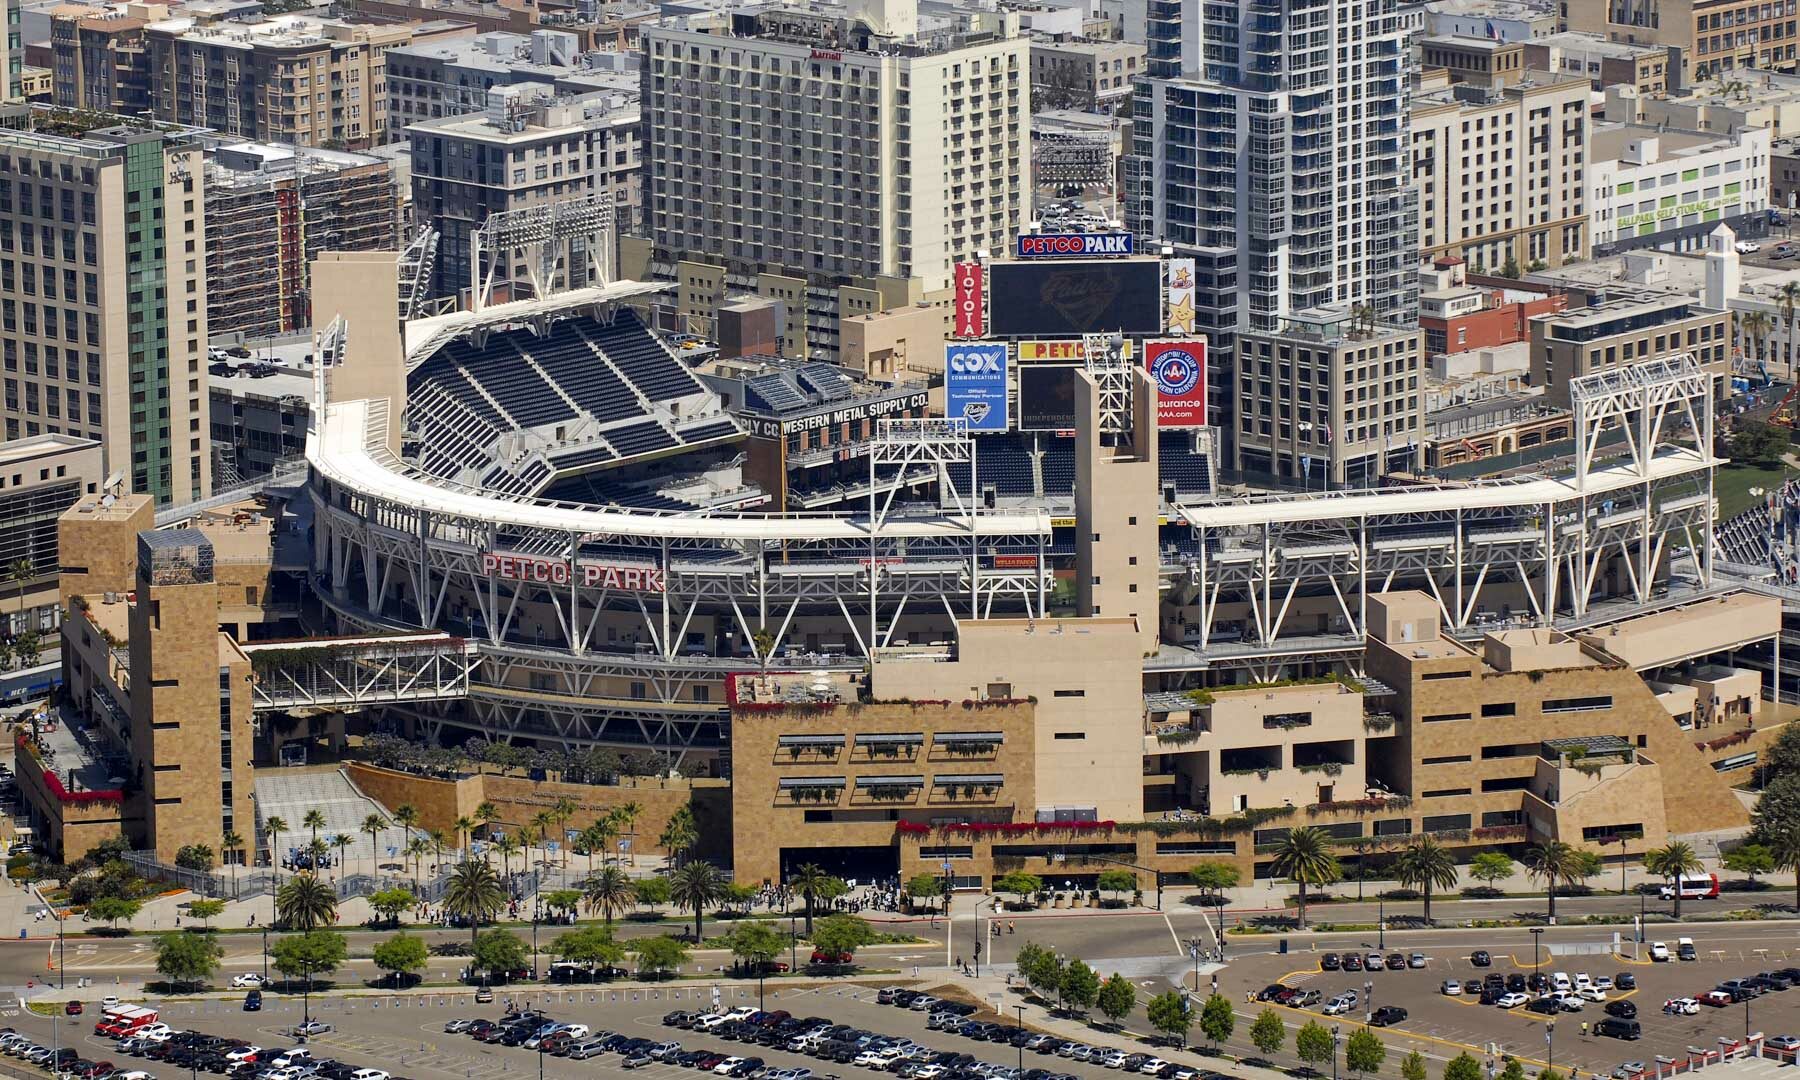 The Coolest Hotels Near Petco Park in San Diego, California